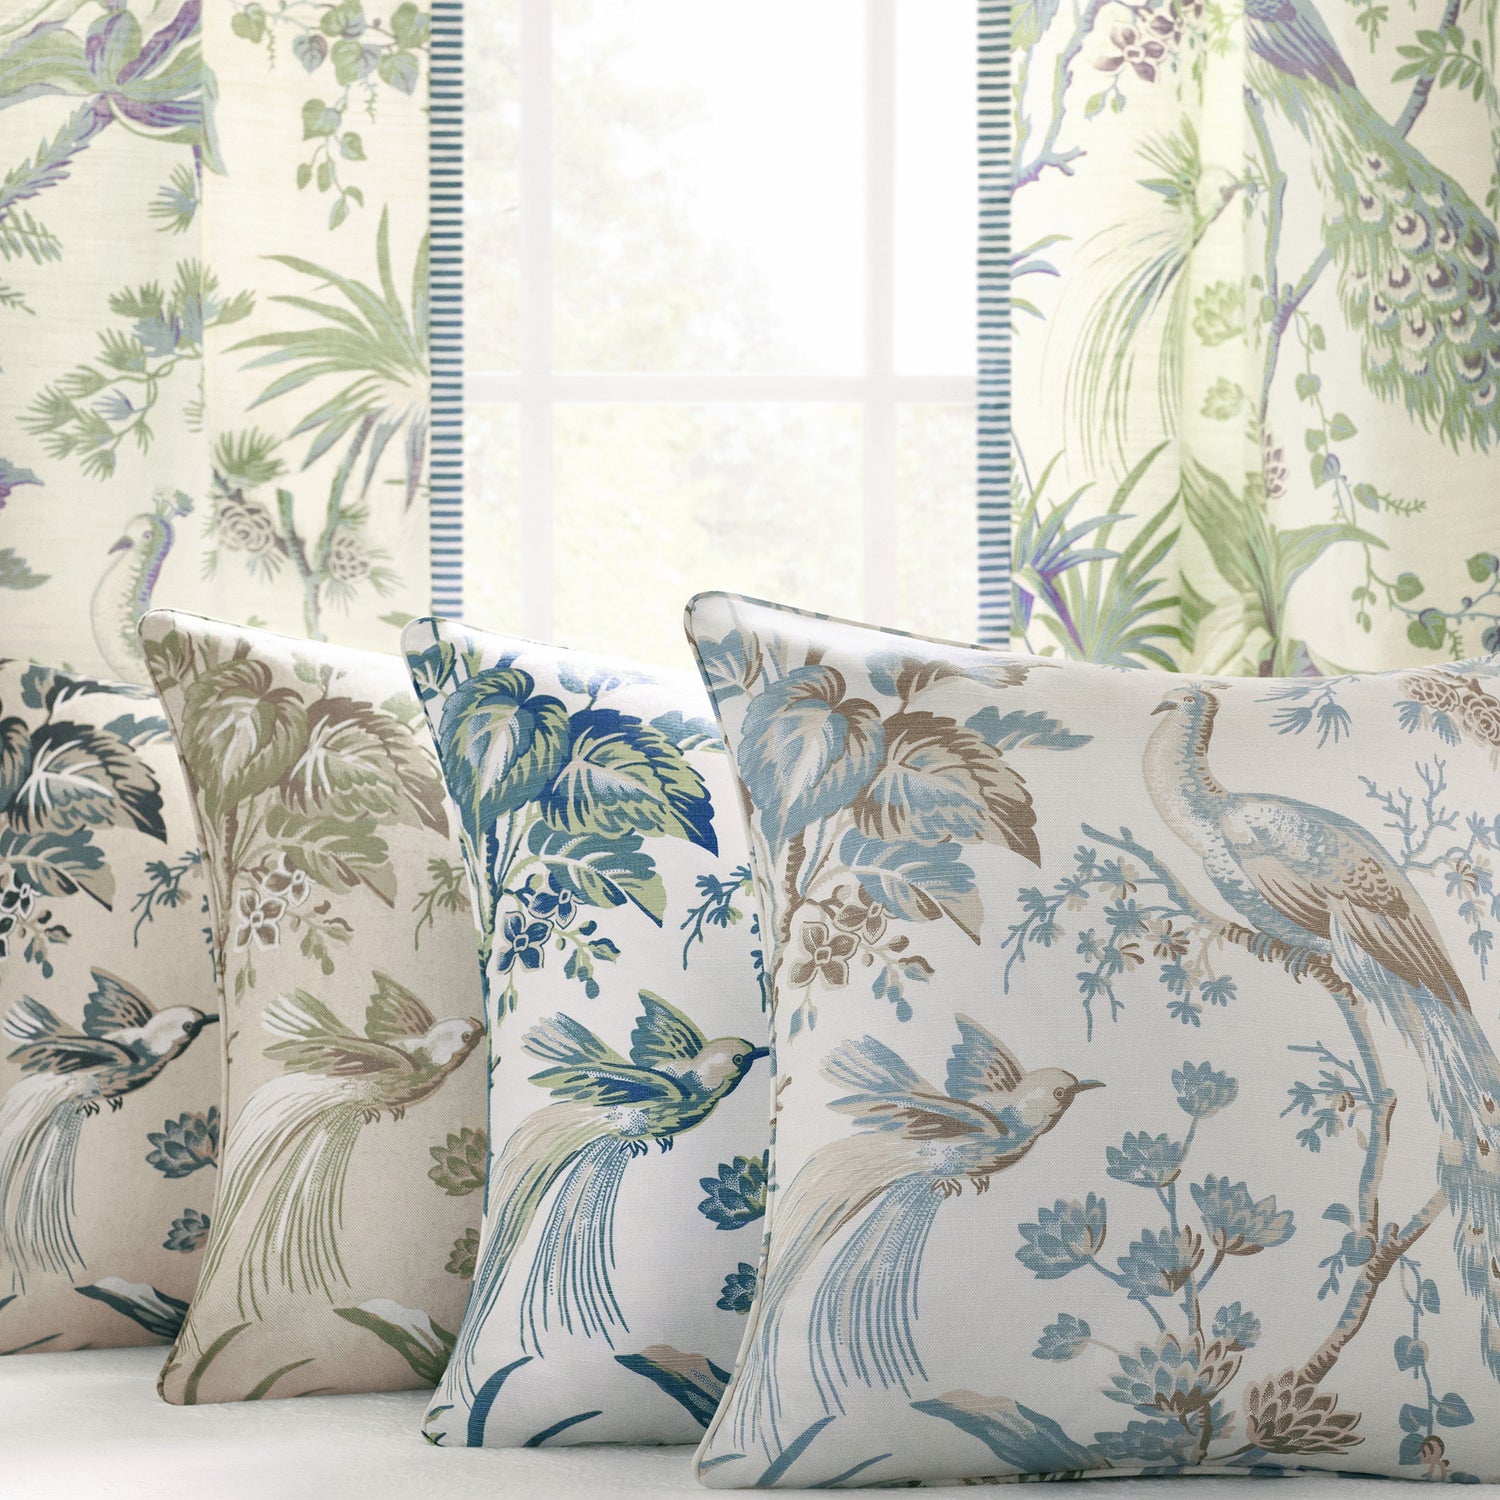 Collection of draperies and pillow fabrics in Peacock toile printed fabric featuring soft blue and beige color fabric - pattern number AF57828 - by Anna French in the Bristol collection